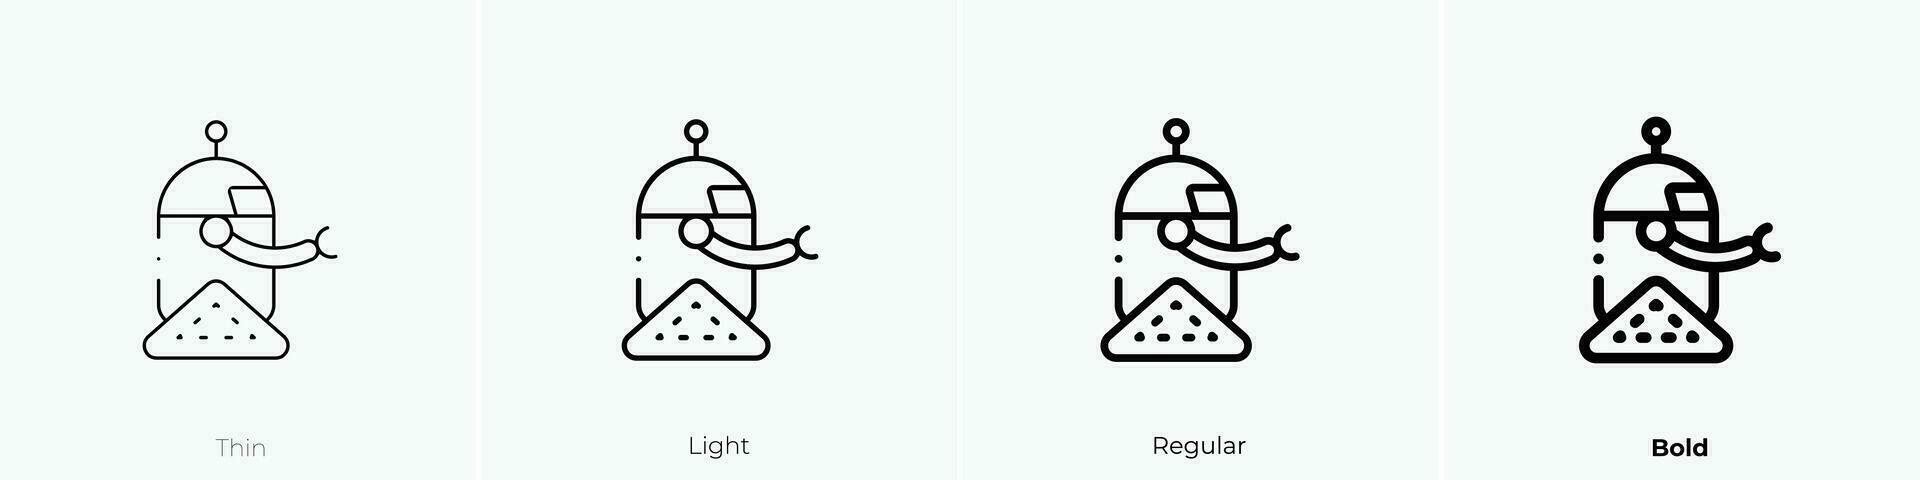 robot icon. Thin, Light, Regular And Bold style design isolated on white background vector